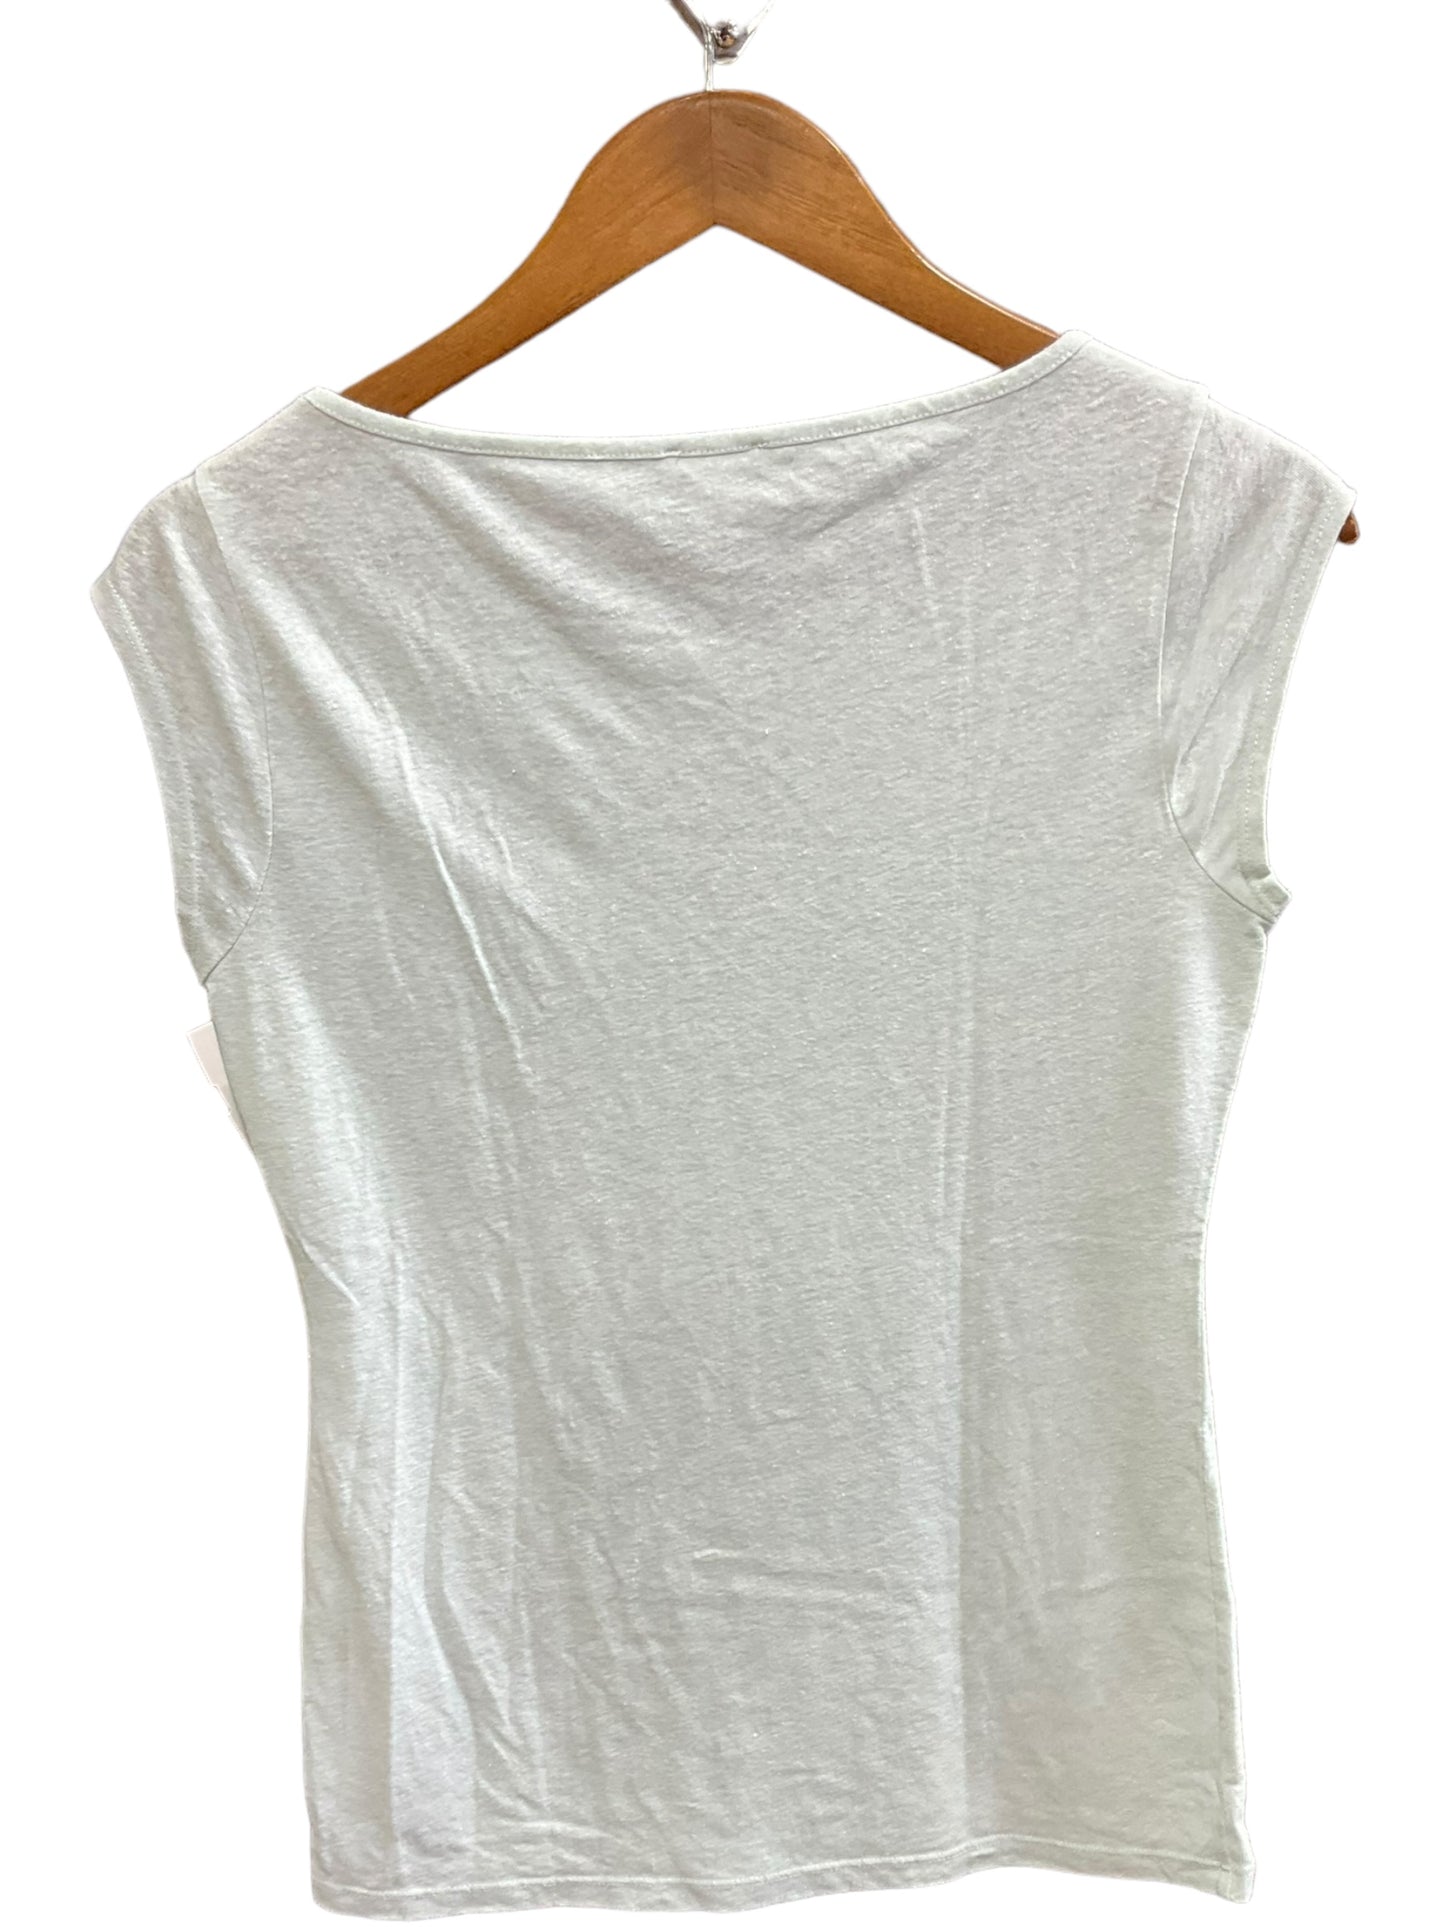 Top Short Sleeve Basic By J Crew  Size: Xs